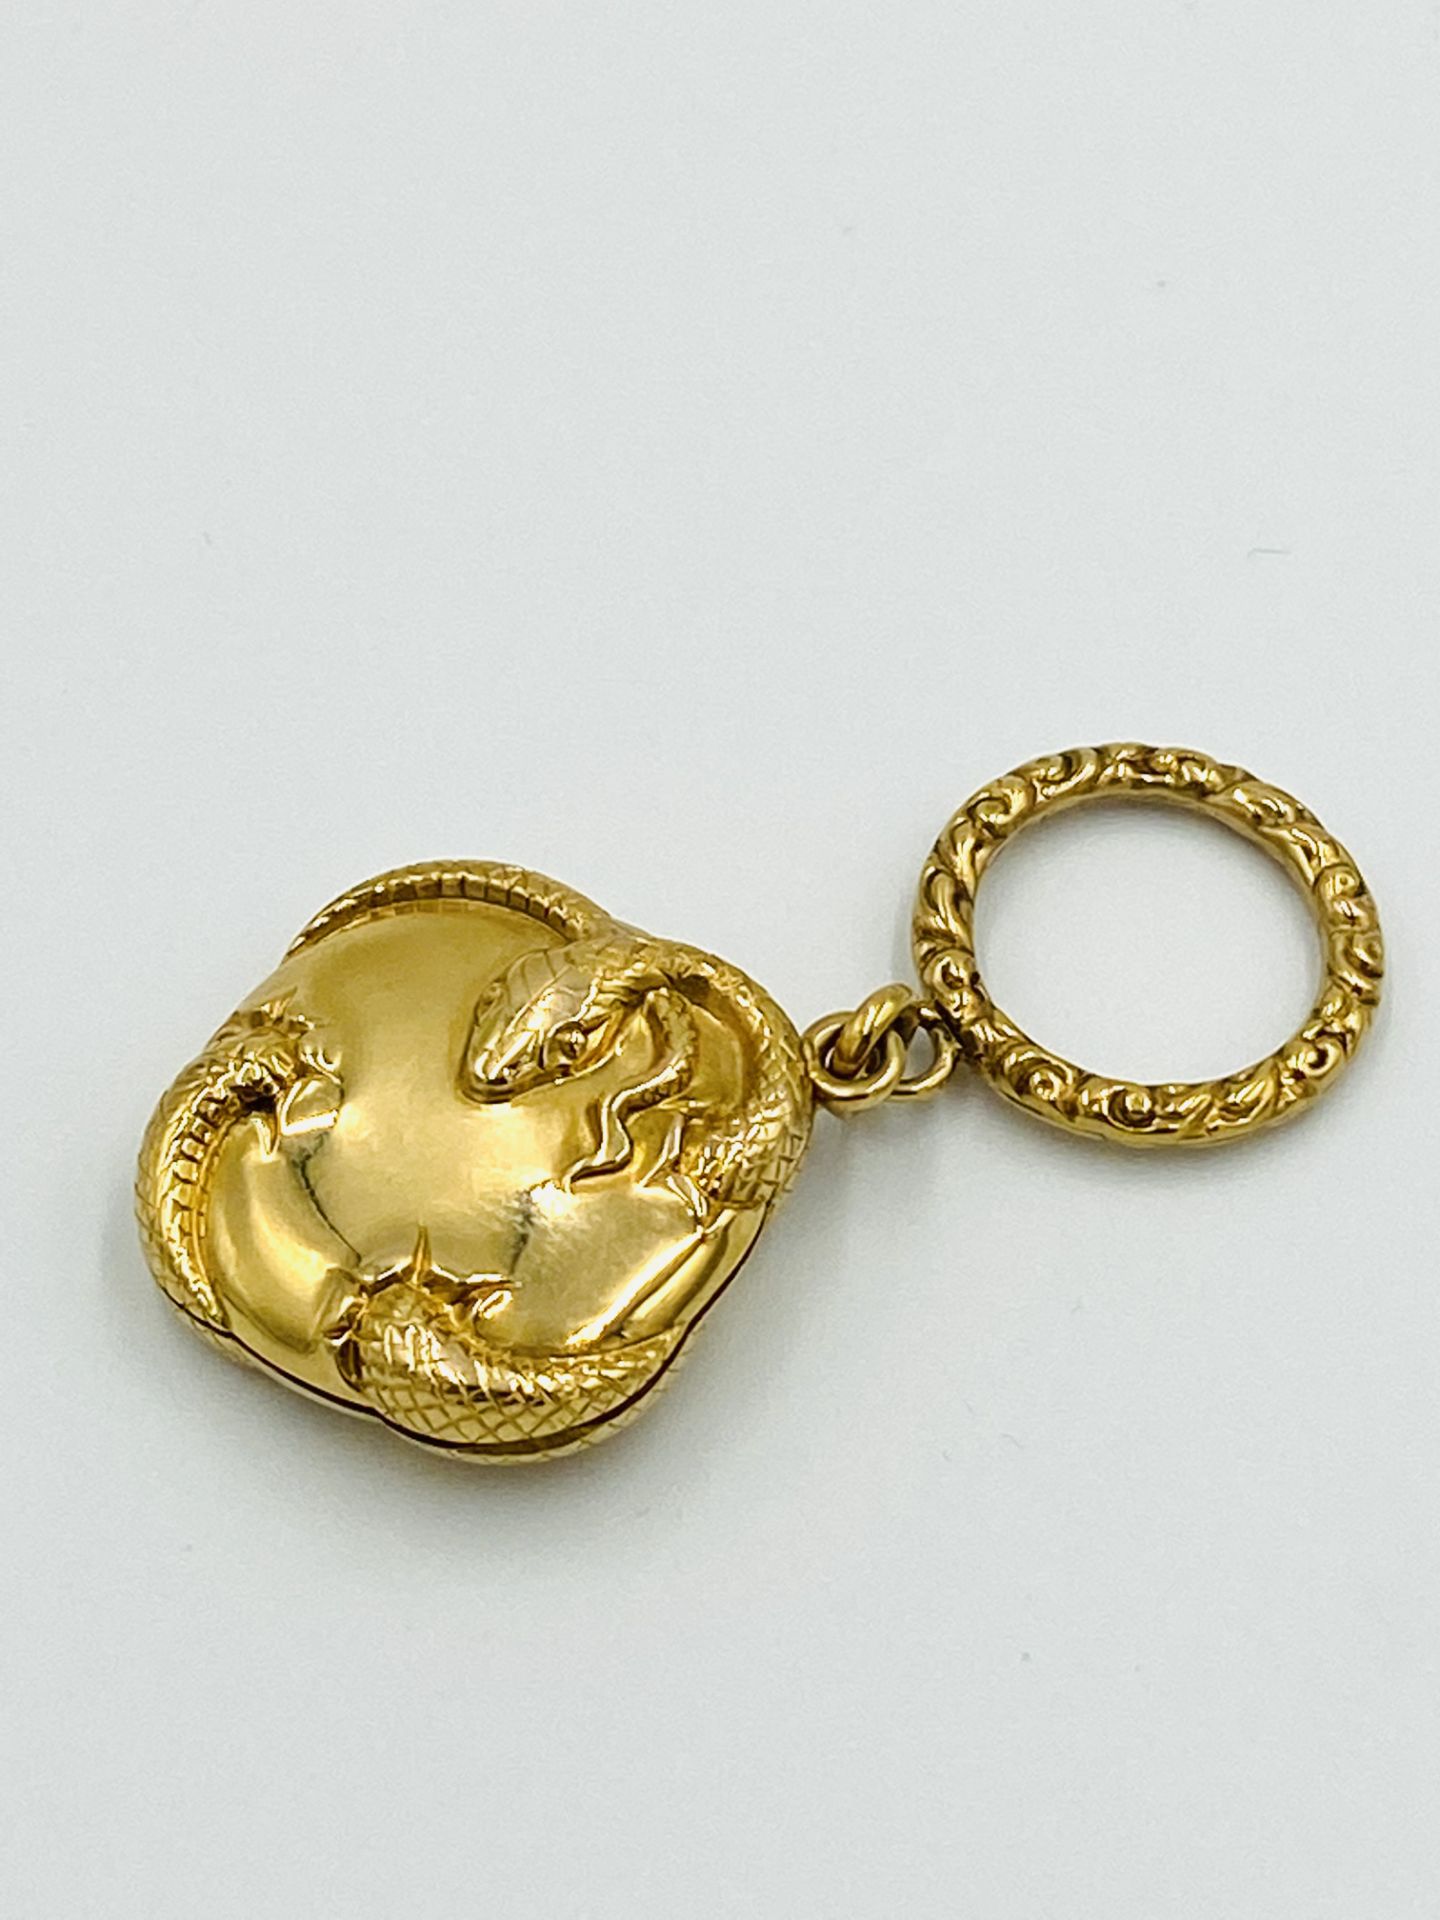 18ct gold pendant - Image 3 of 4